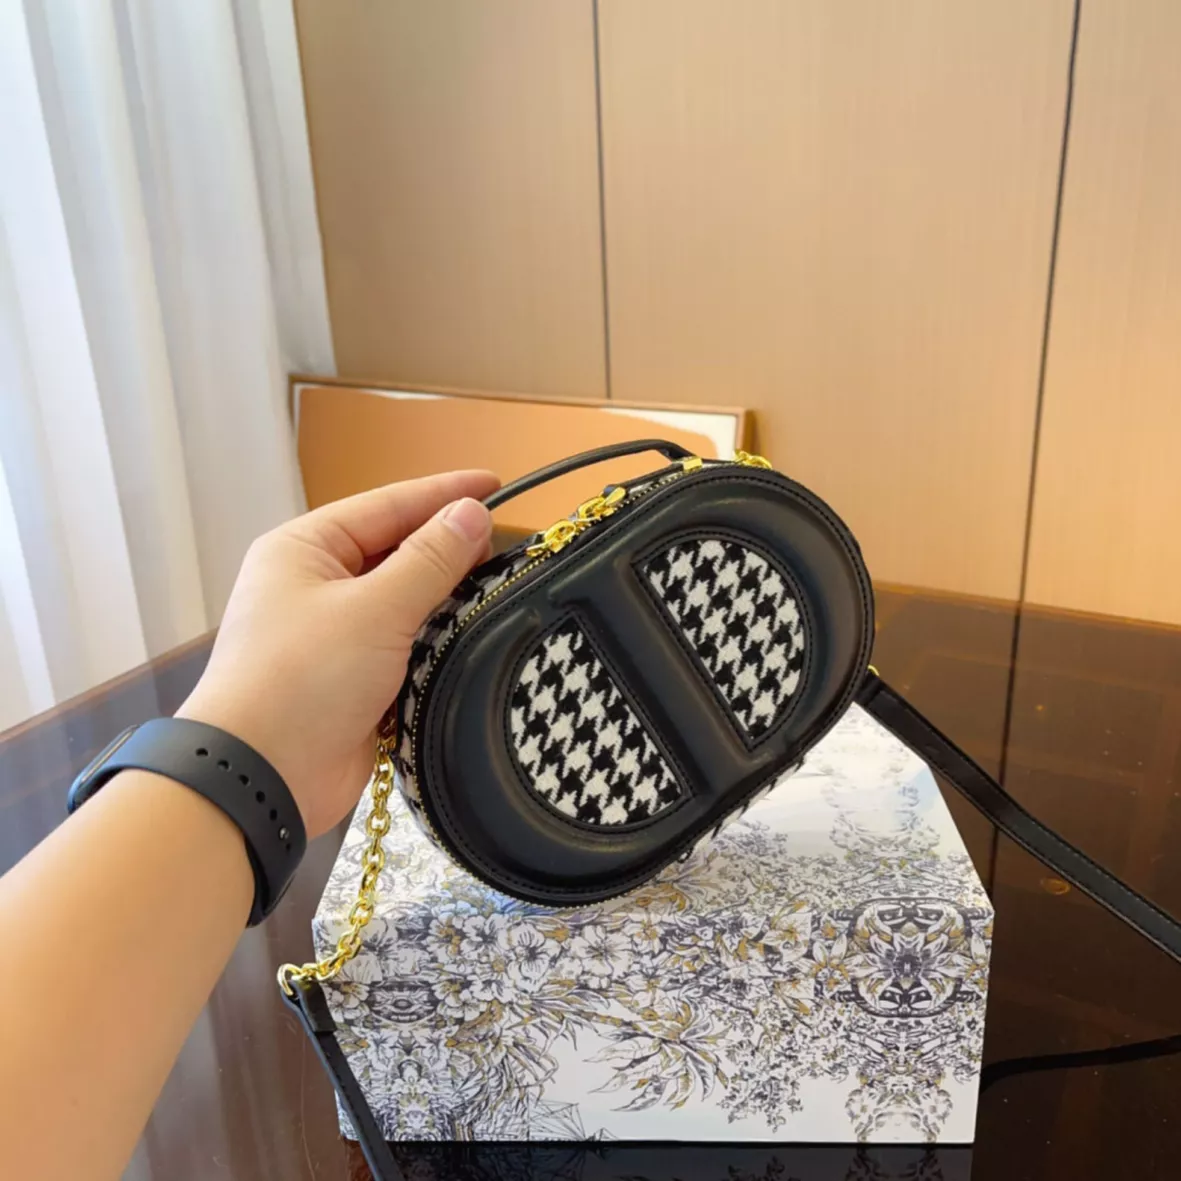 Lady Dior from DHgate #dhgate #dhgatefinds #dhgateunboxing 